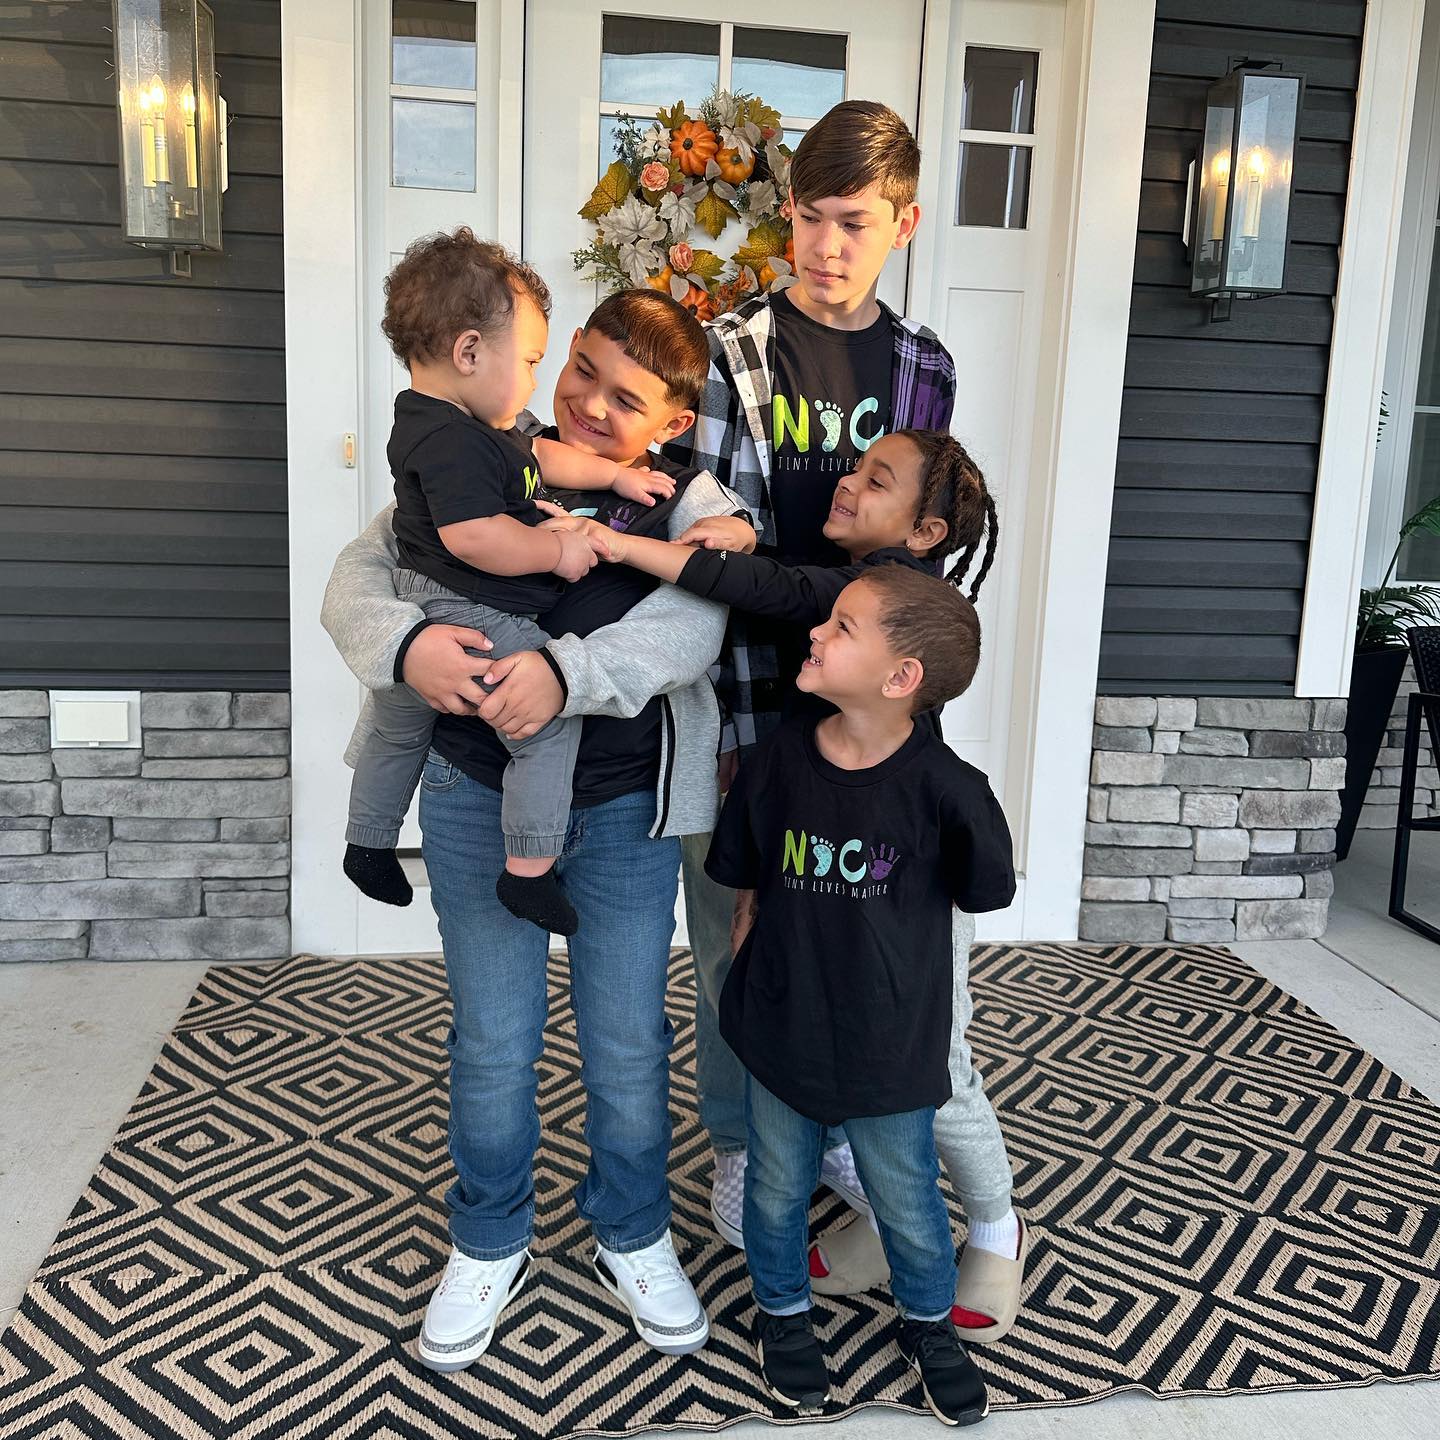 Kailyn took a group photo of her five sons huddled together